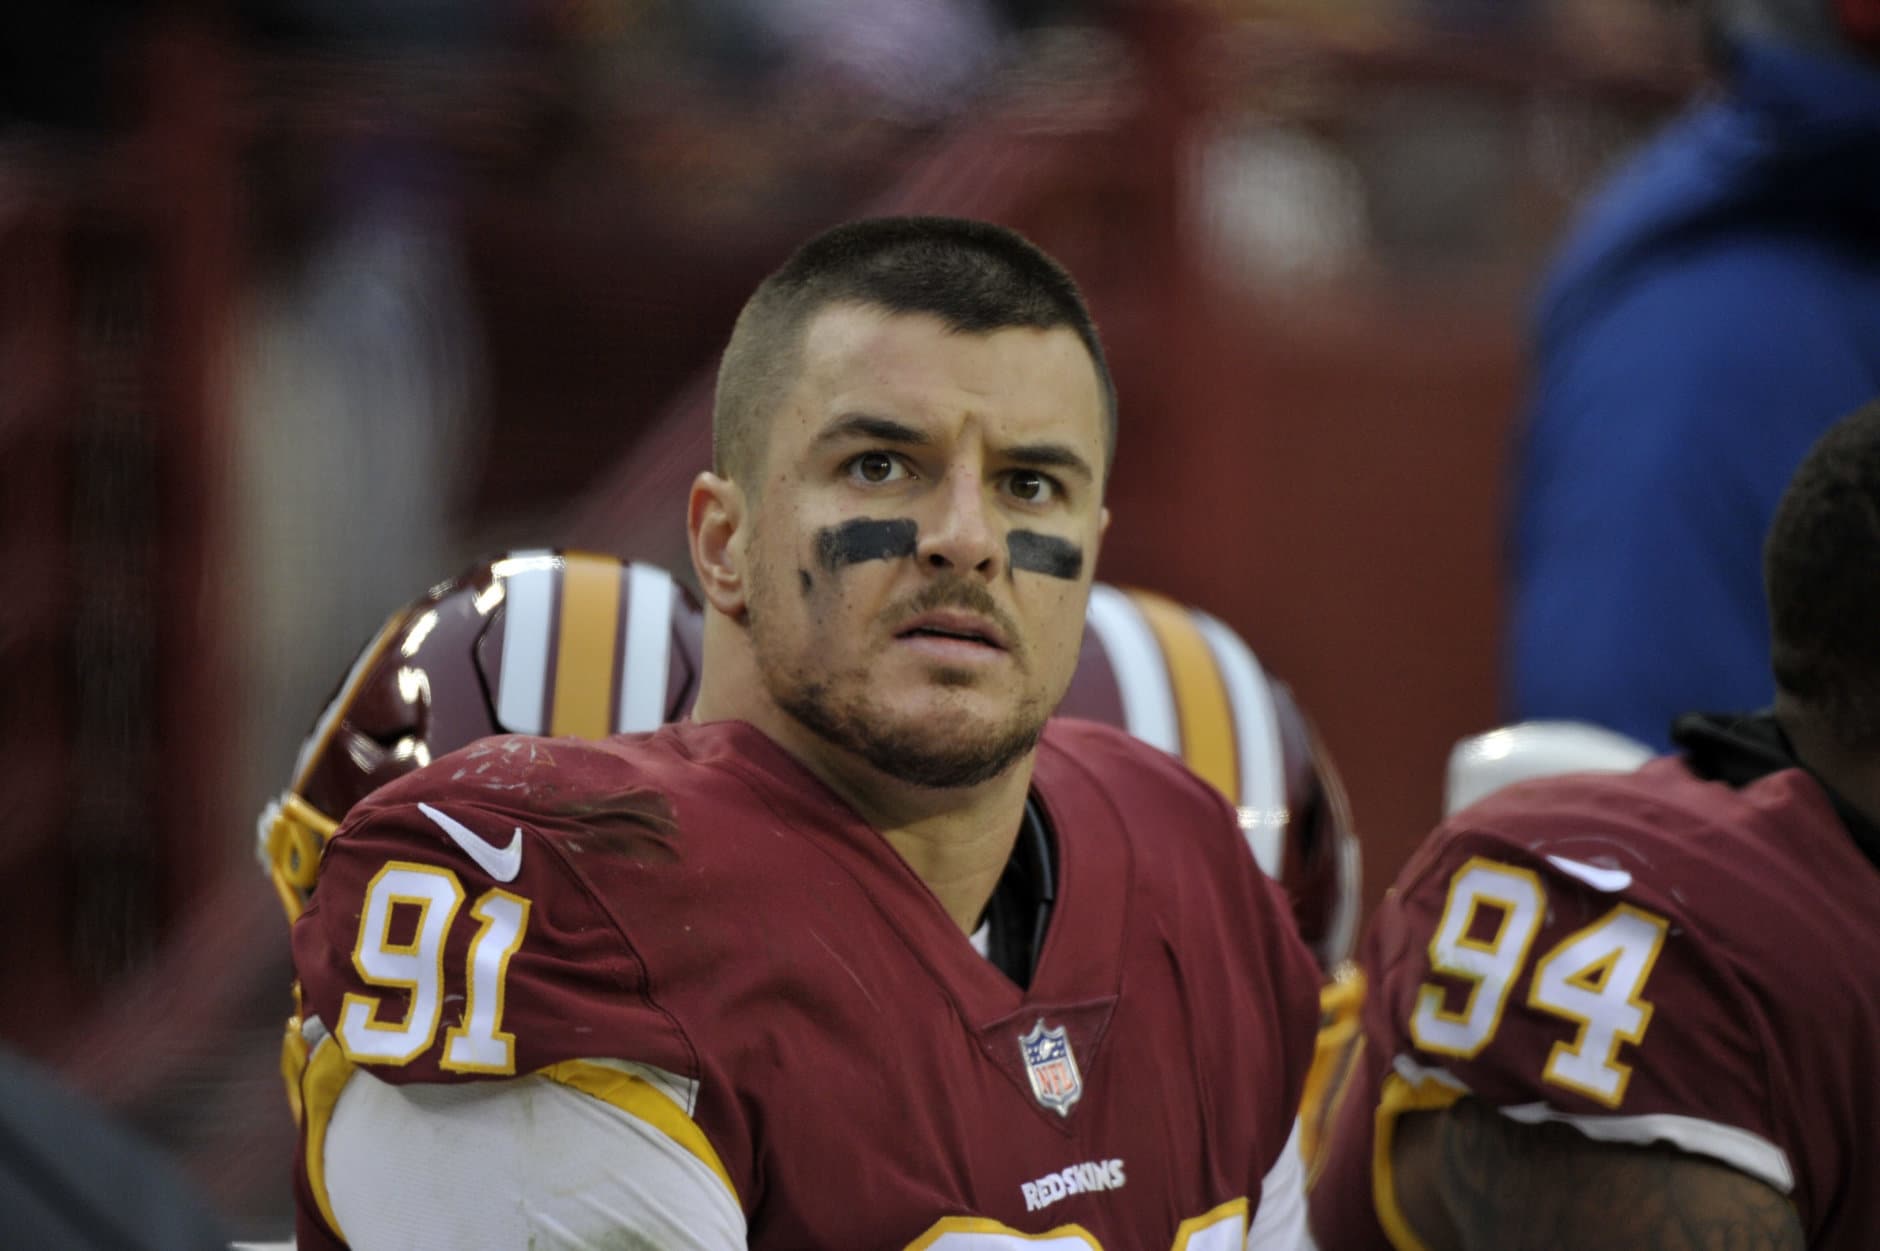 Washington Redskins outside linebacker Ryan Kerrigan (91) sits on the bench during an NFL football game against the New York Giants, Sunday, Dec. 9, 2018, in Landover, Md. (AP Photo/Mark Tenally)